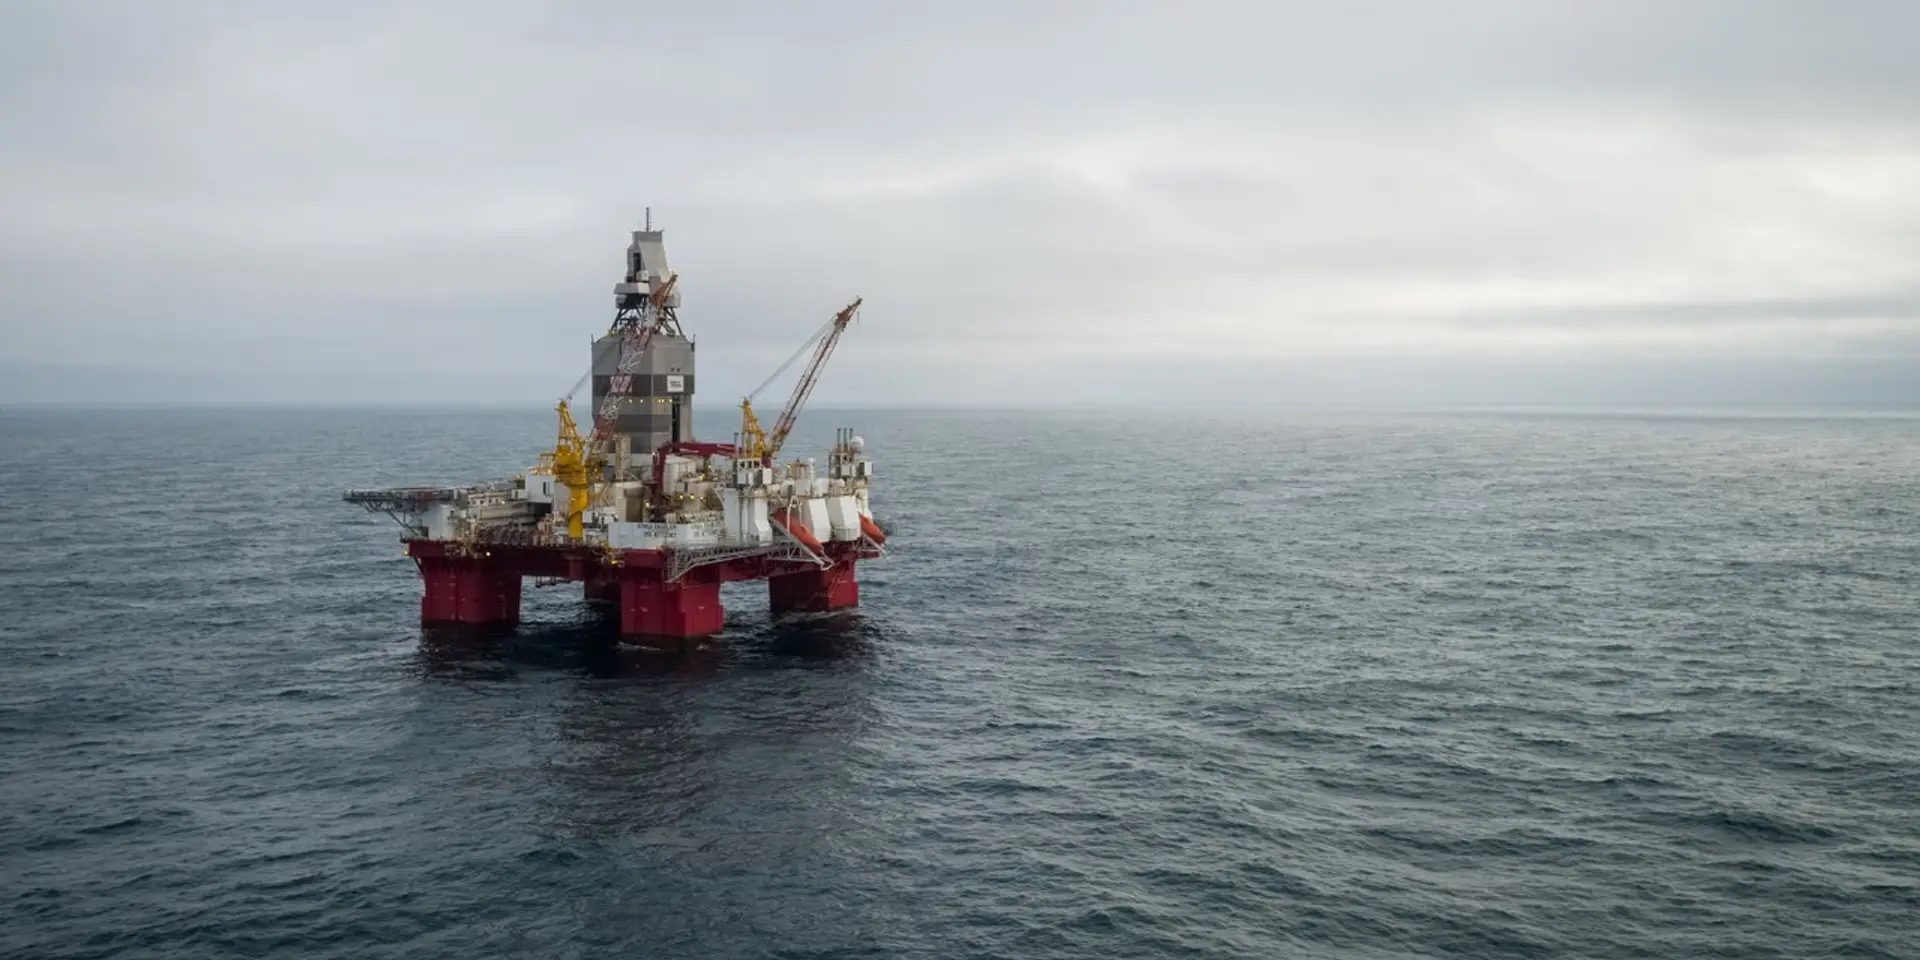 Transocean Sees Increased Demand for High-Specification Floaters Amid Offshore Market Rebound